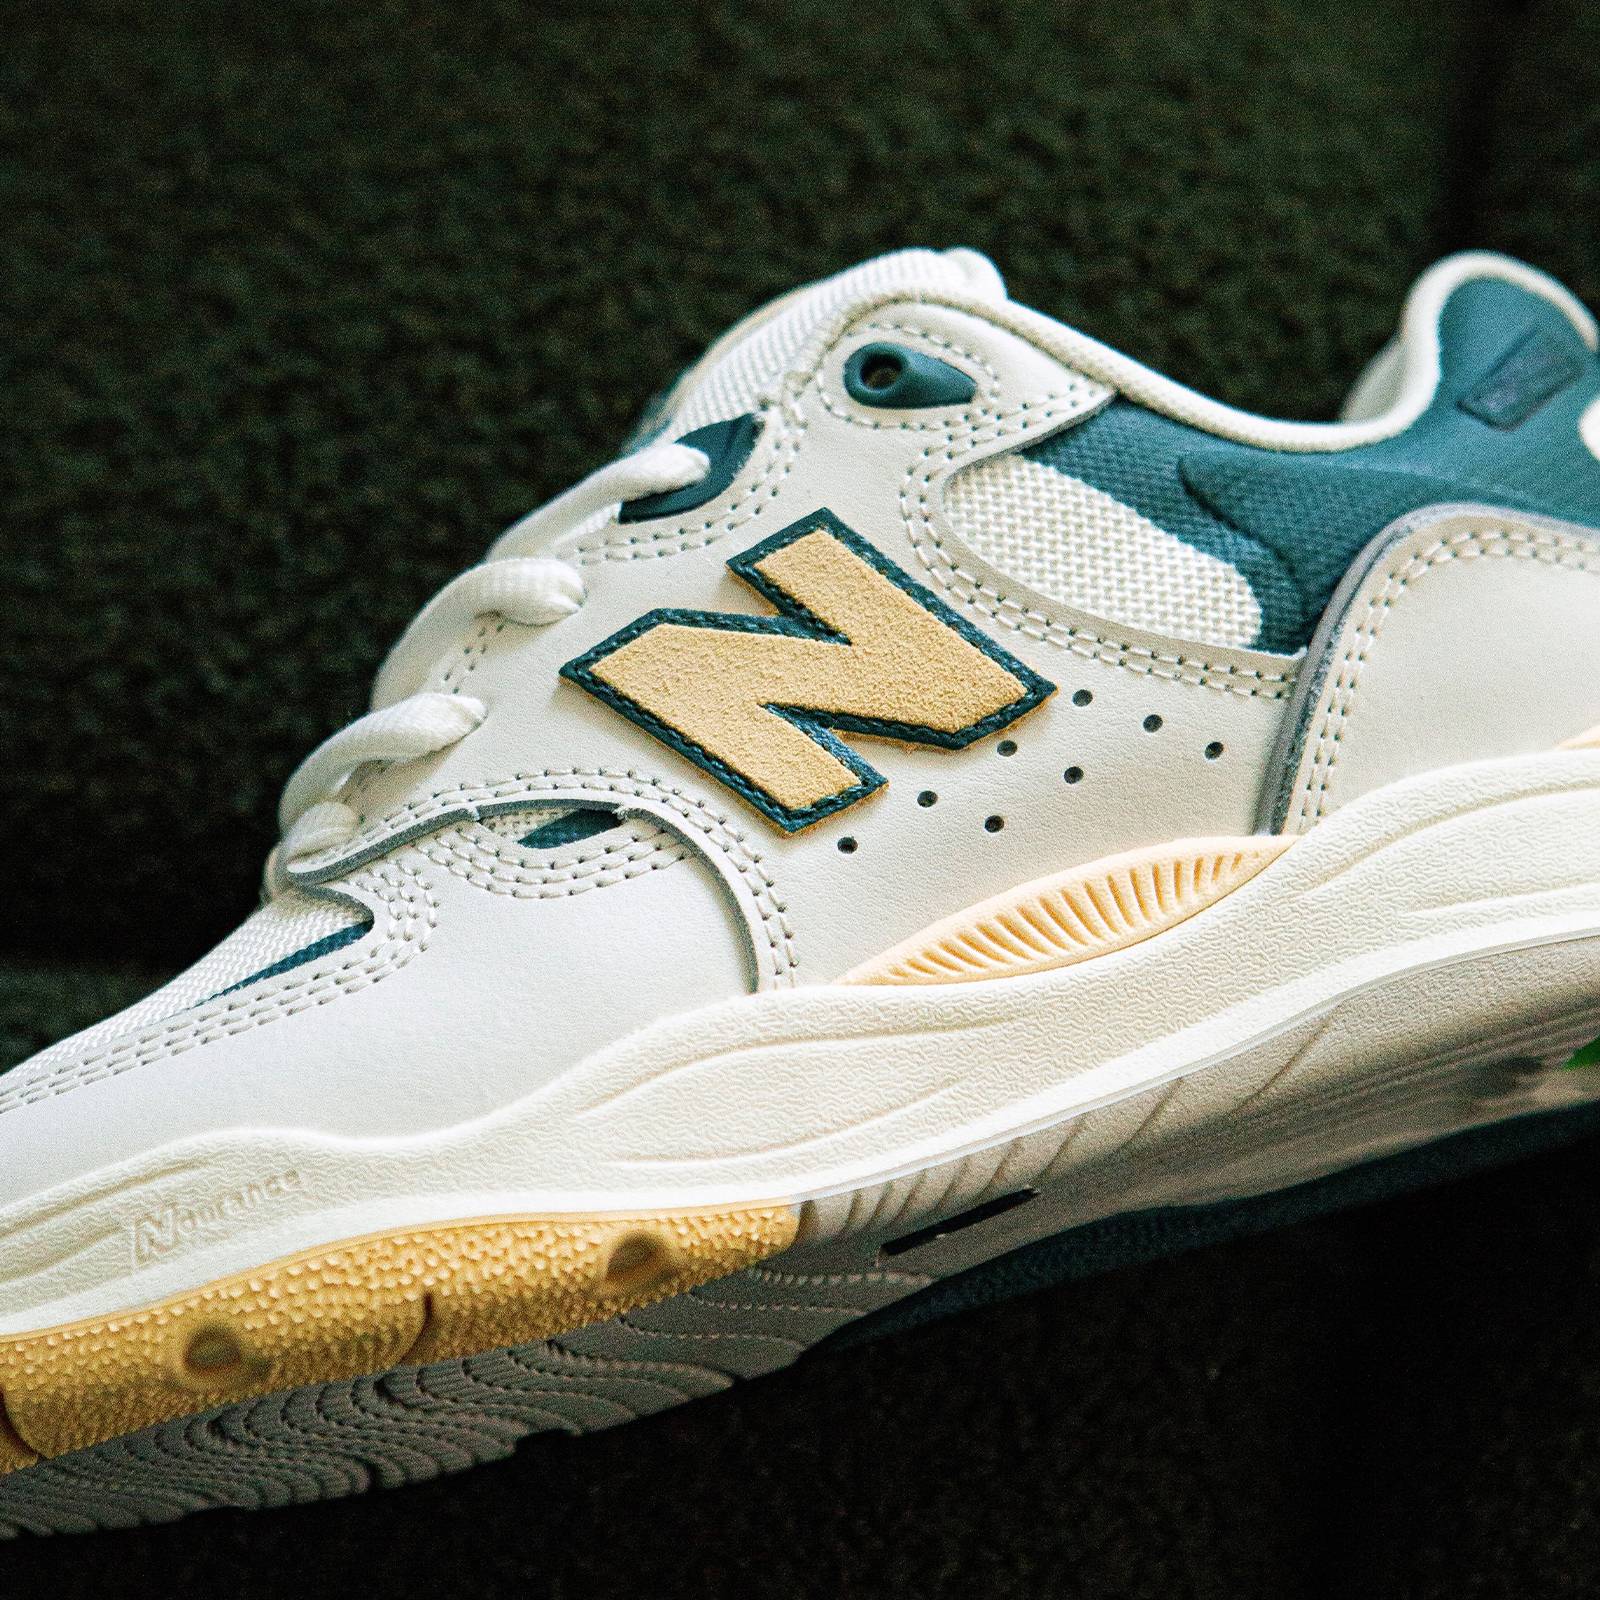 Latest from New Balance